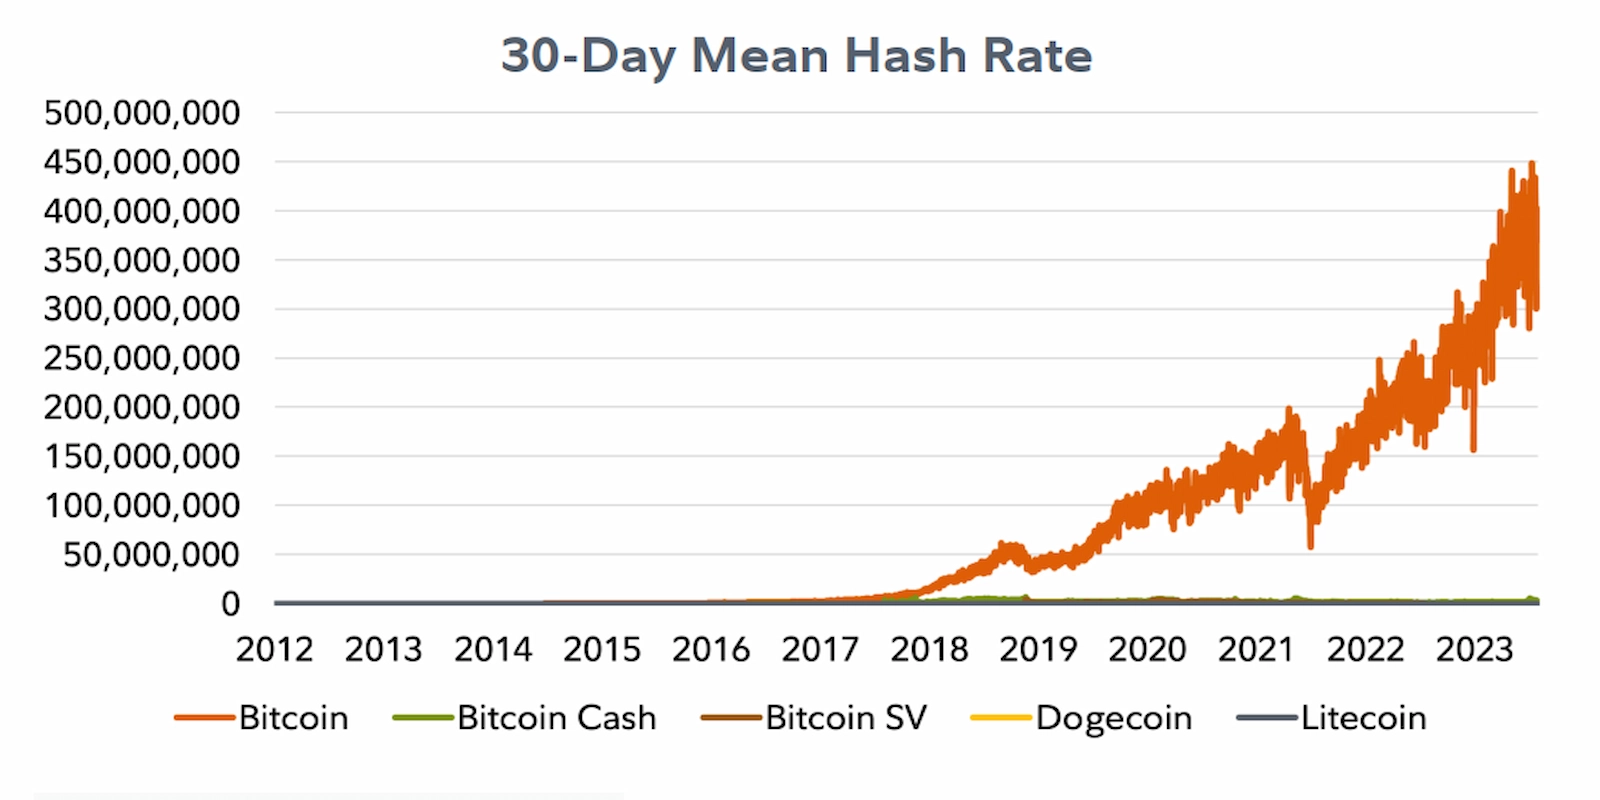 BTC hash rate outpaces other proof-of-work networks.